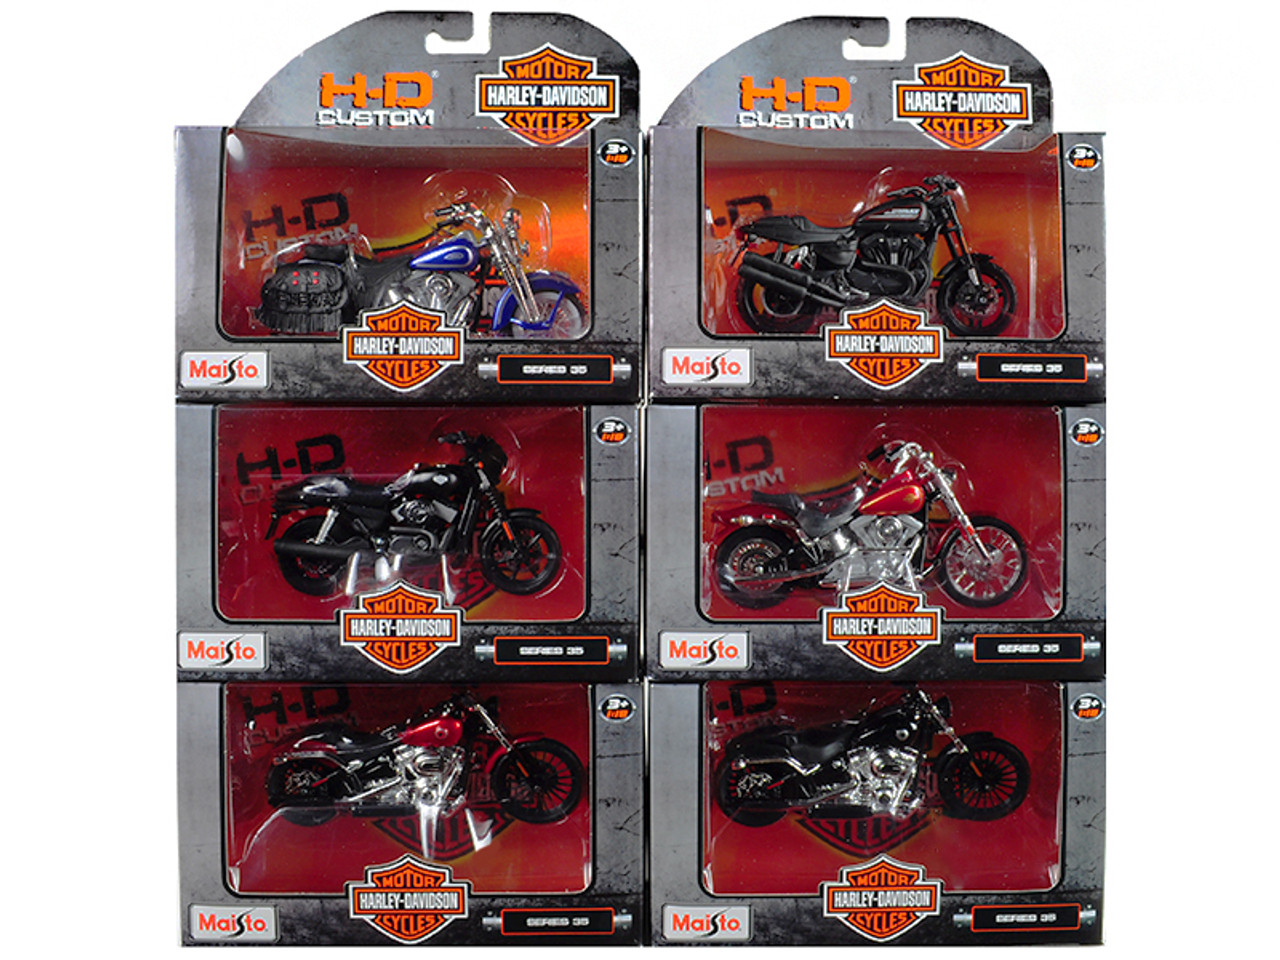 Harley Davidson Motorcycle 6 piece Set Series 35 1/18 Diecast Motorcycle Models by Maisto